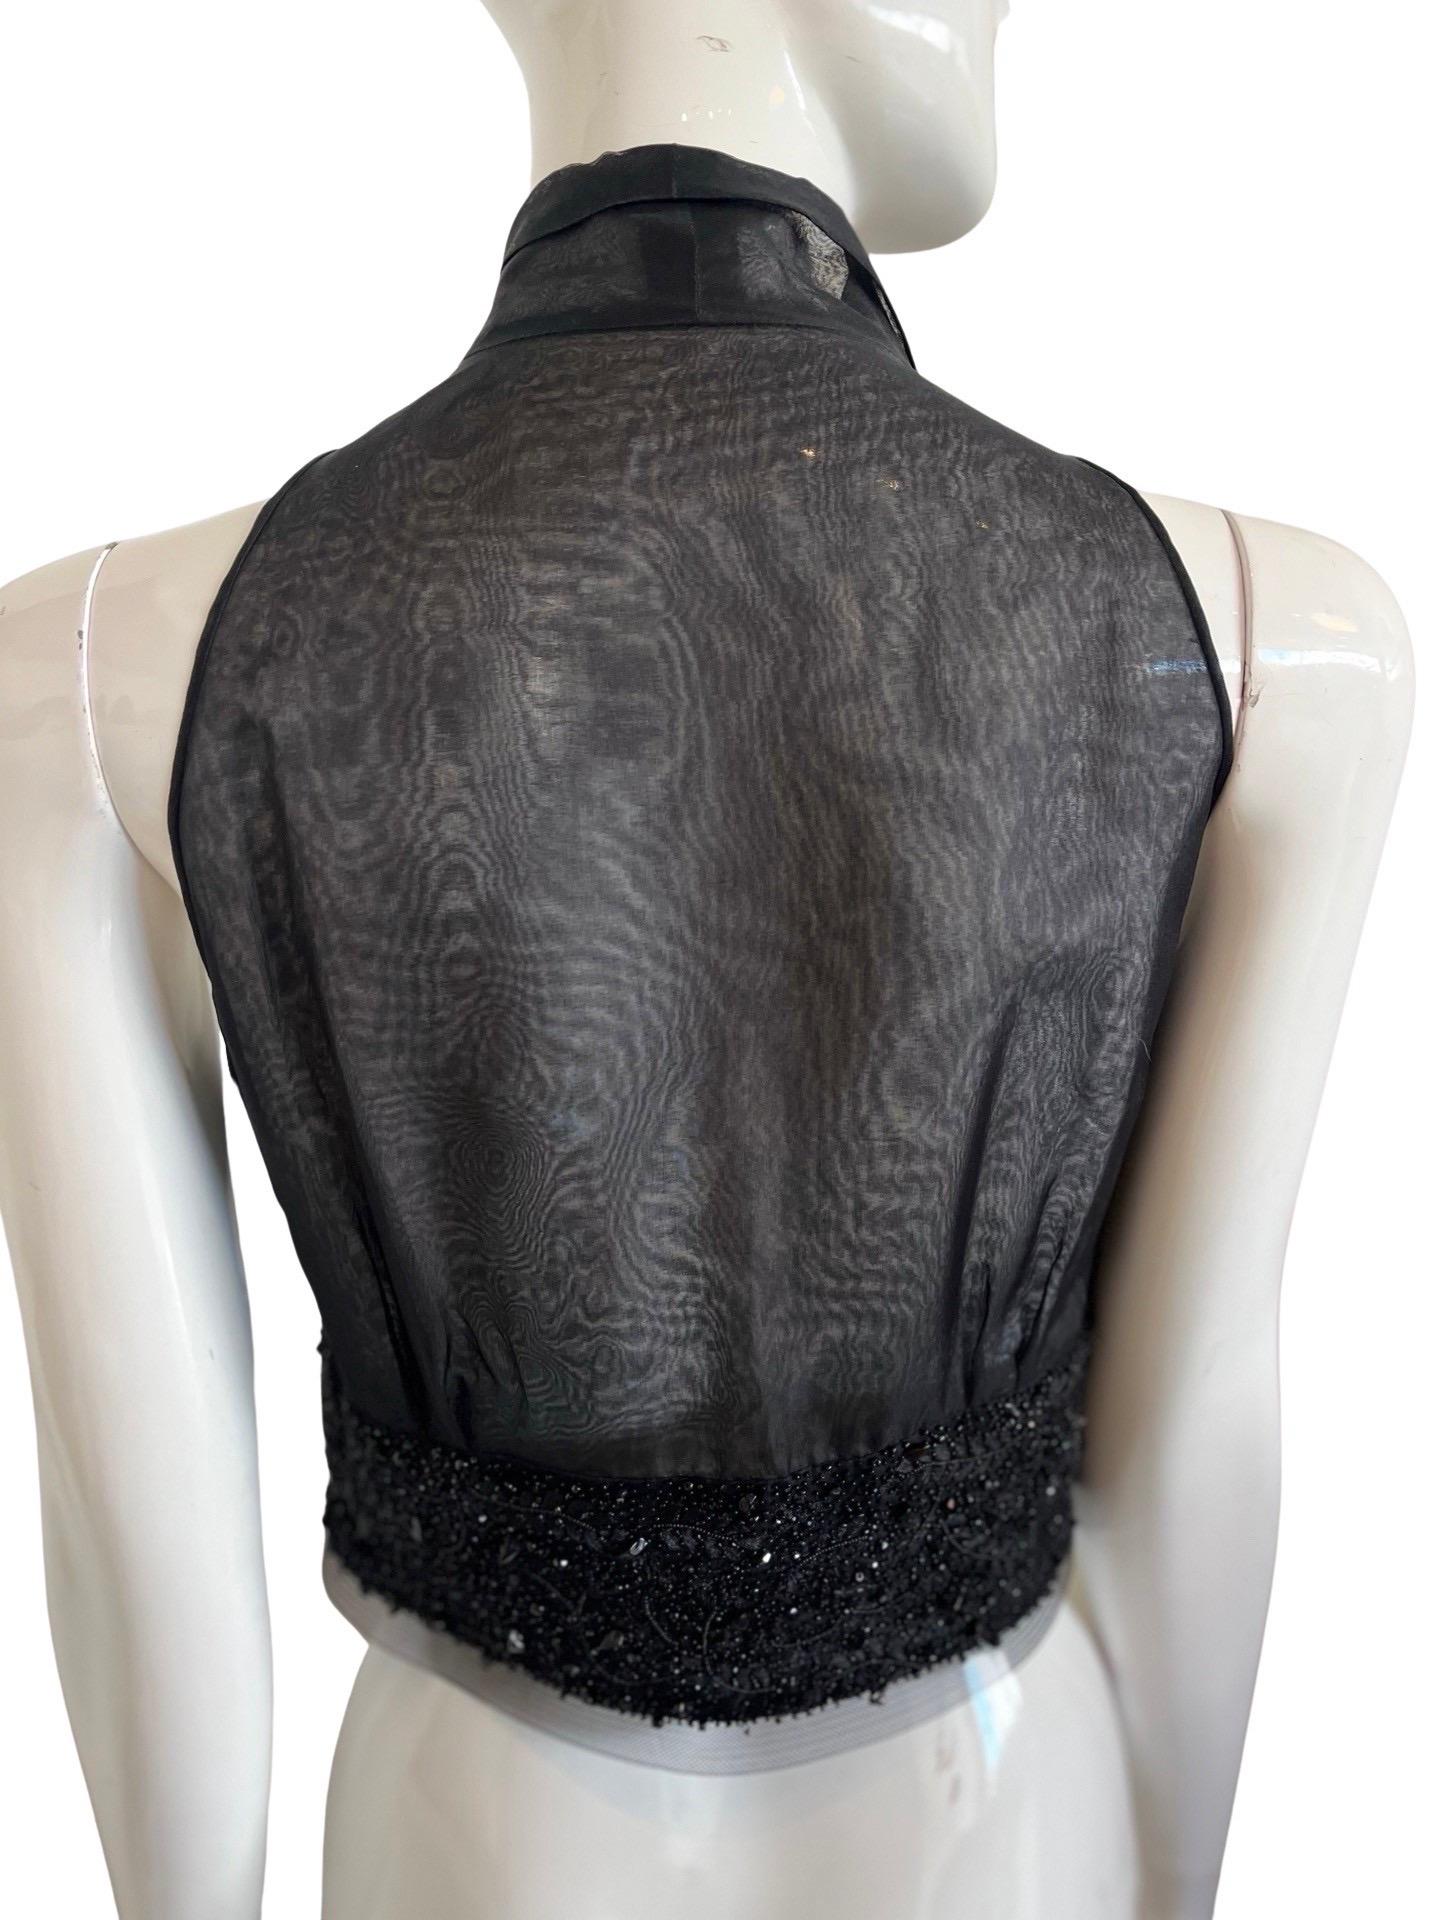 Incredible Bill Blass sheer organza waistcoat with organza collar and bust and a heavily beaded and embroidered waist band.  The waist buttons with 9 buttons and there is a heavy mesh trim at the bottom.  Could be worn over a button down or on its